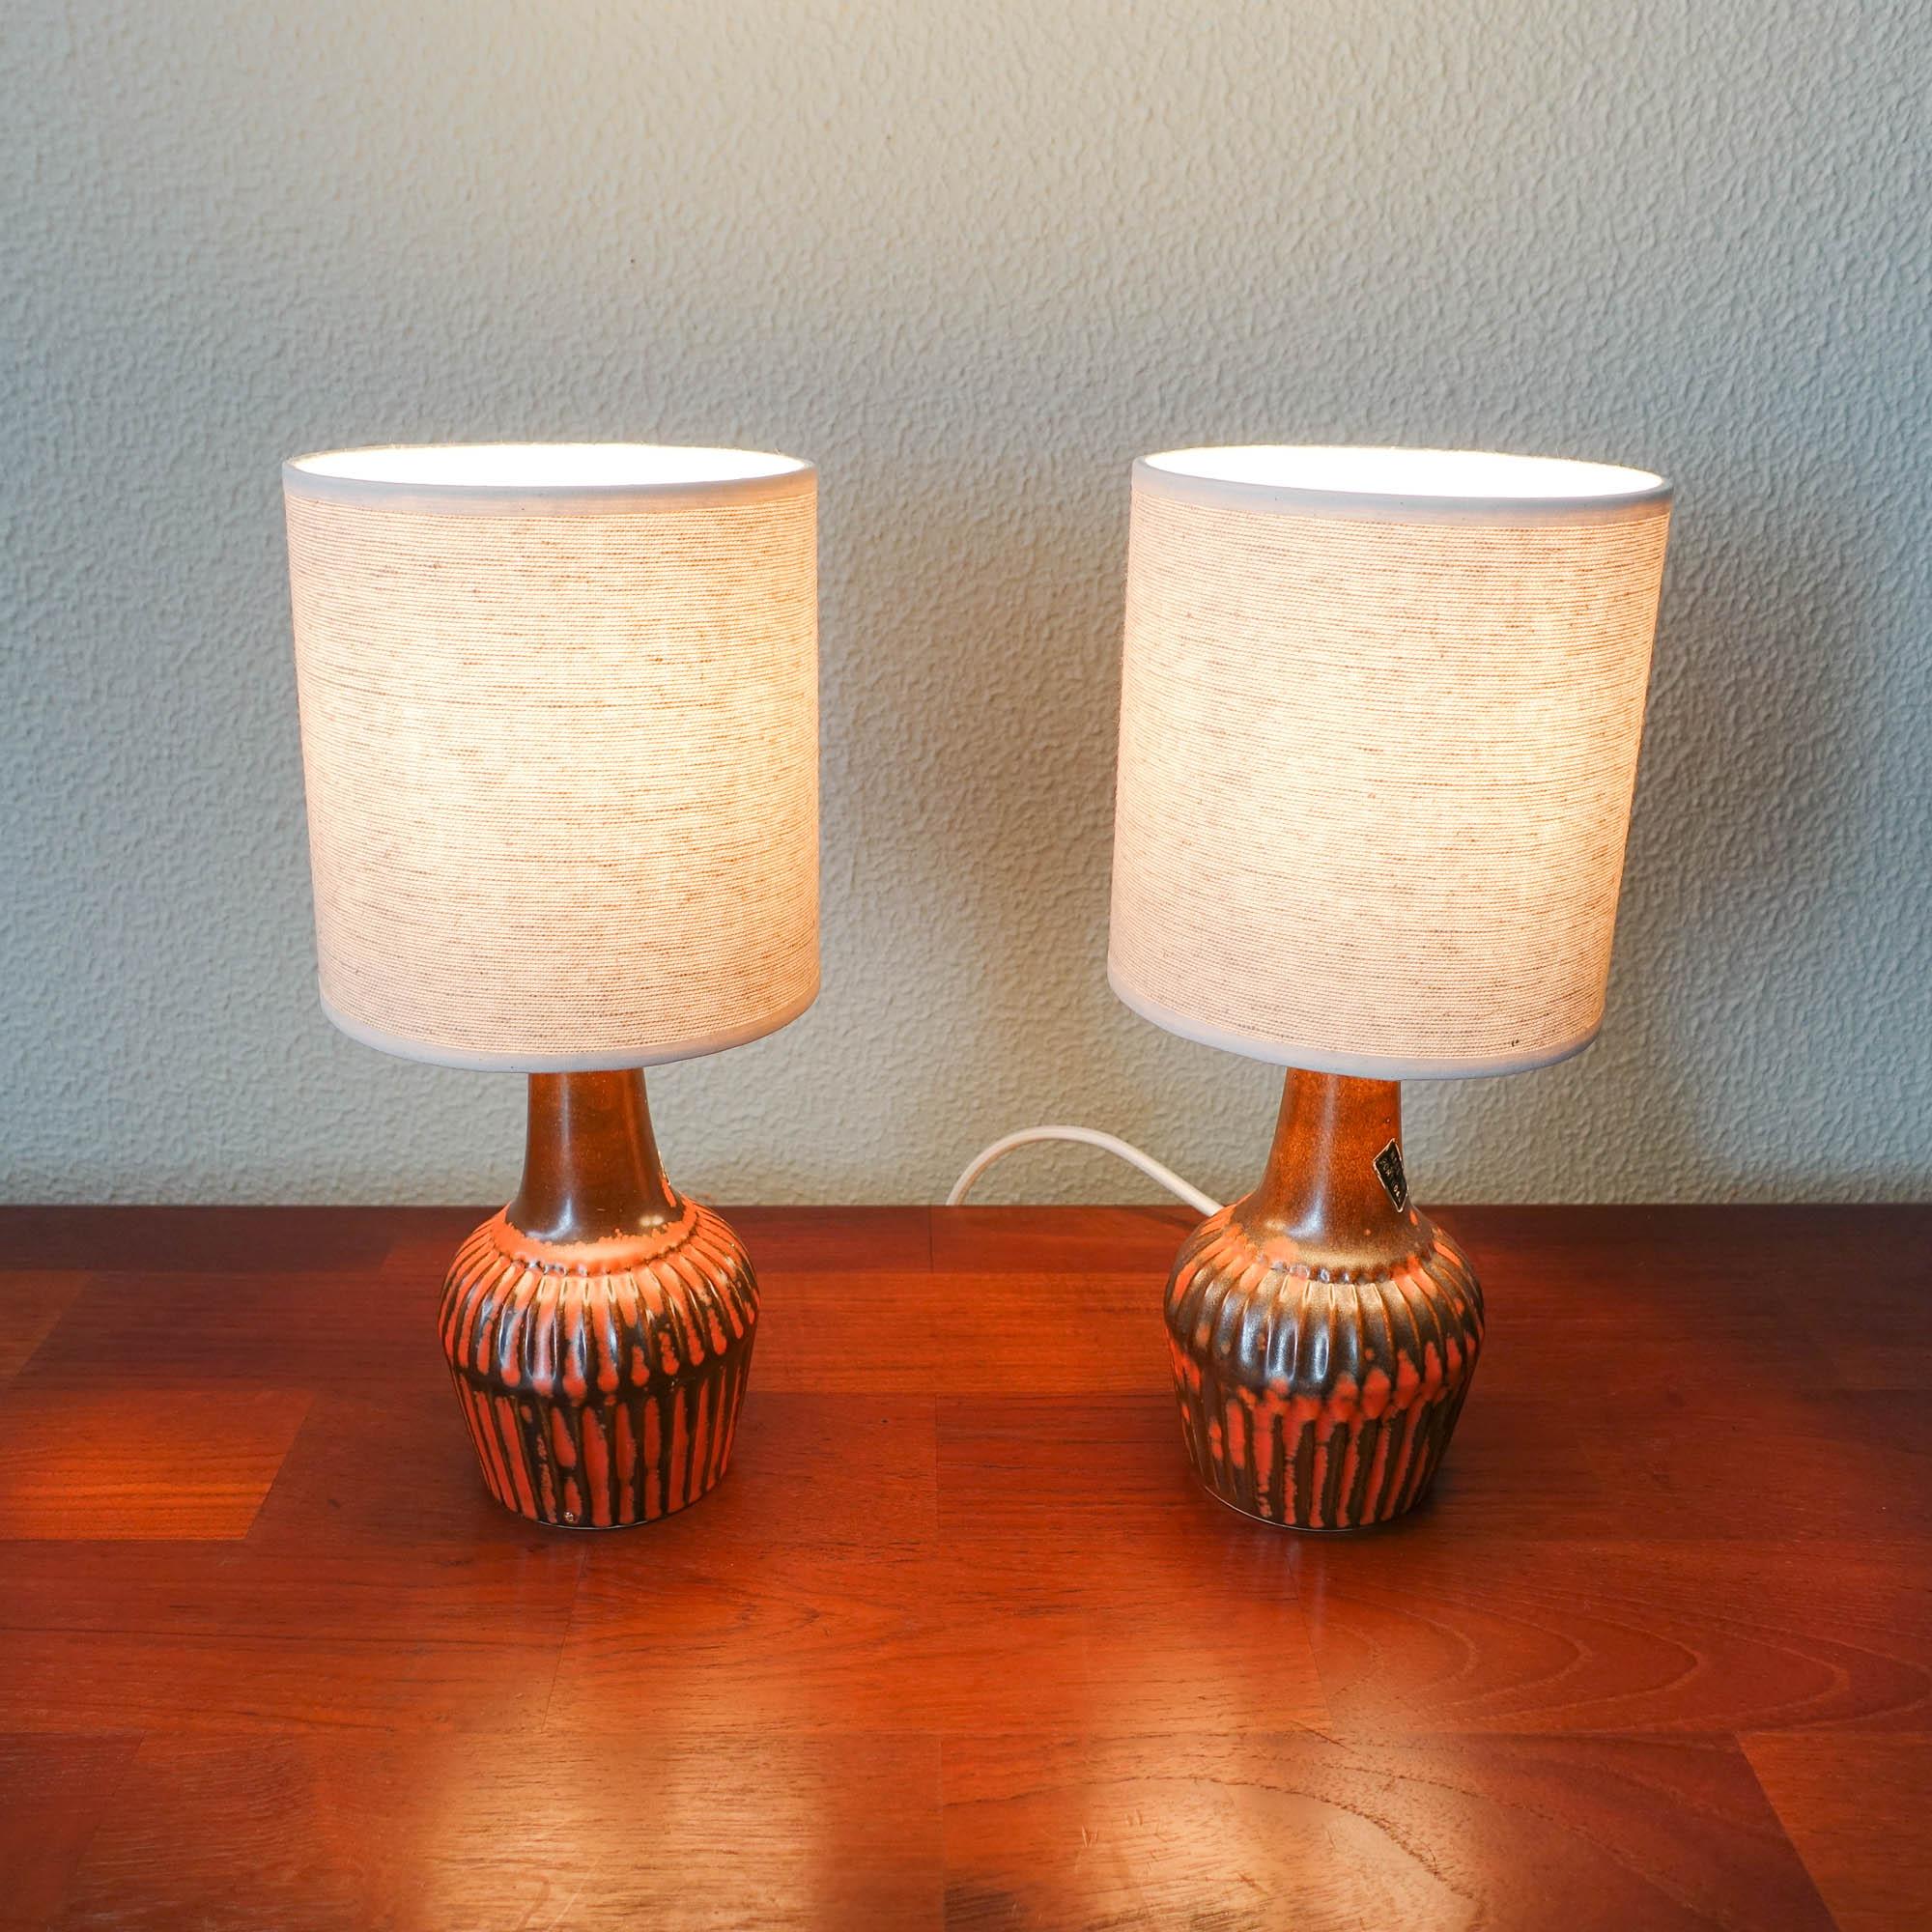 Pair of Brown and Orange Ceramic Table Lamps by Secla, 1960s For Sale 11